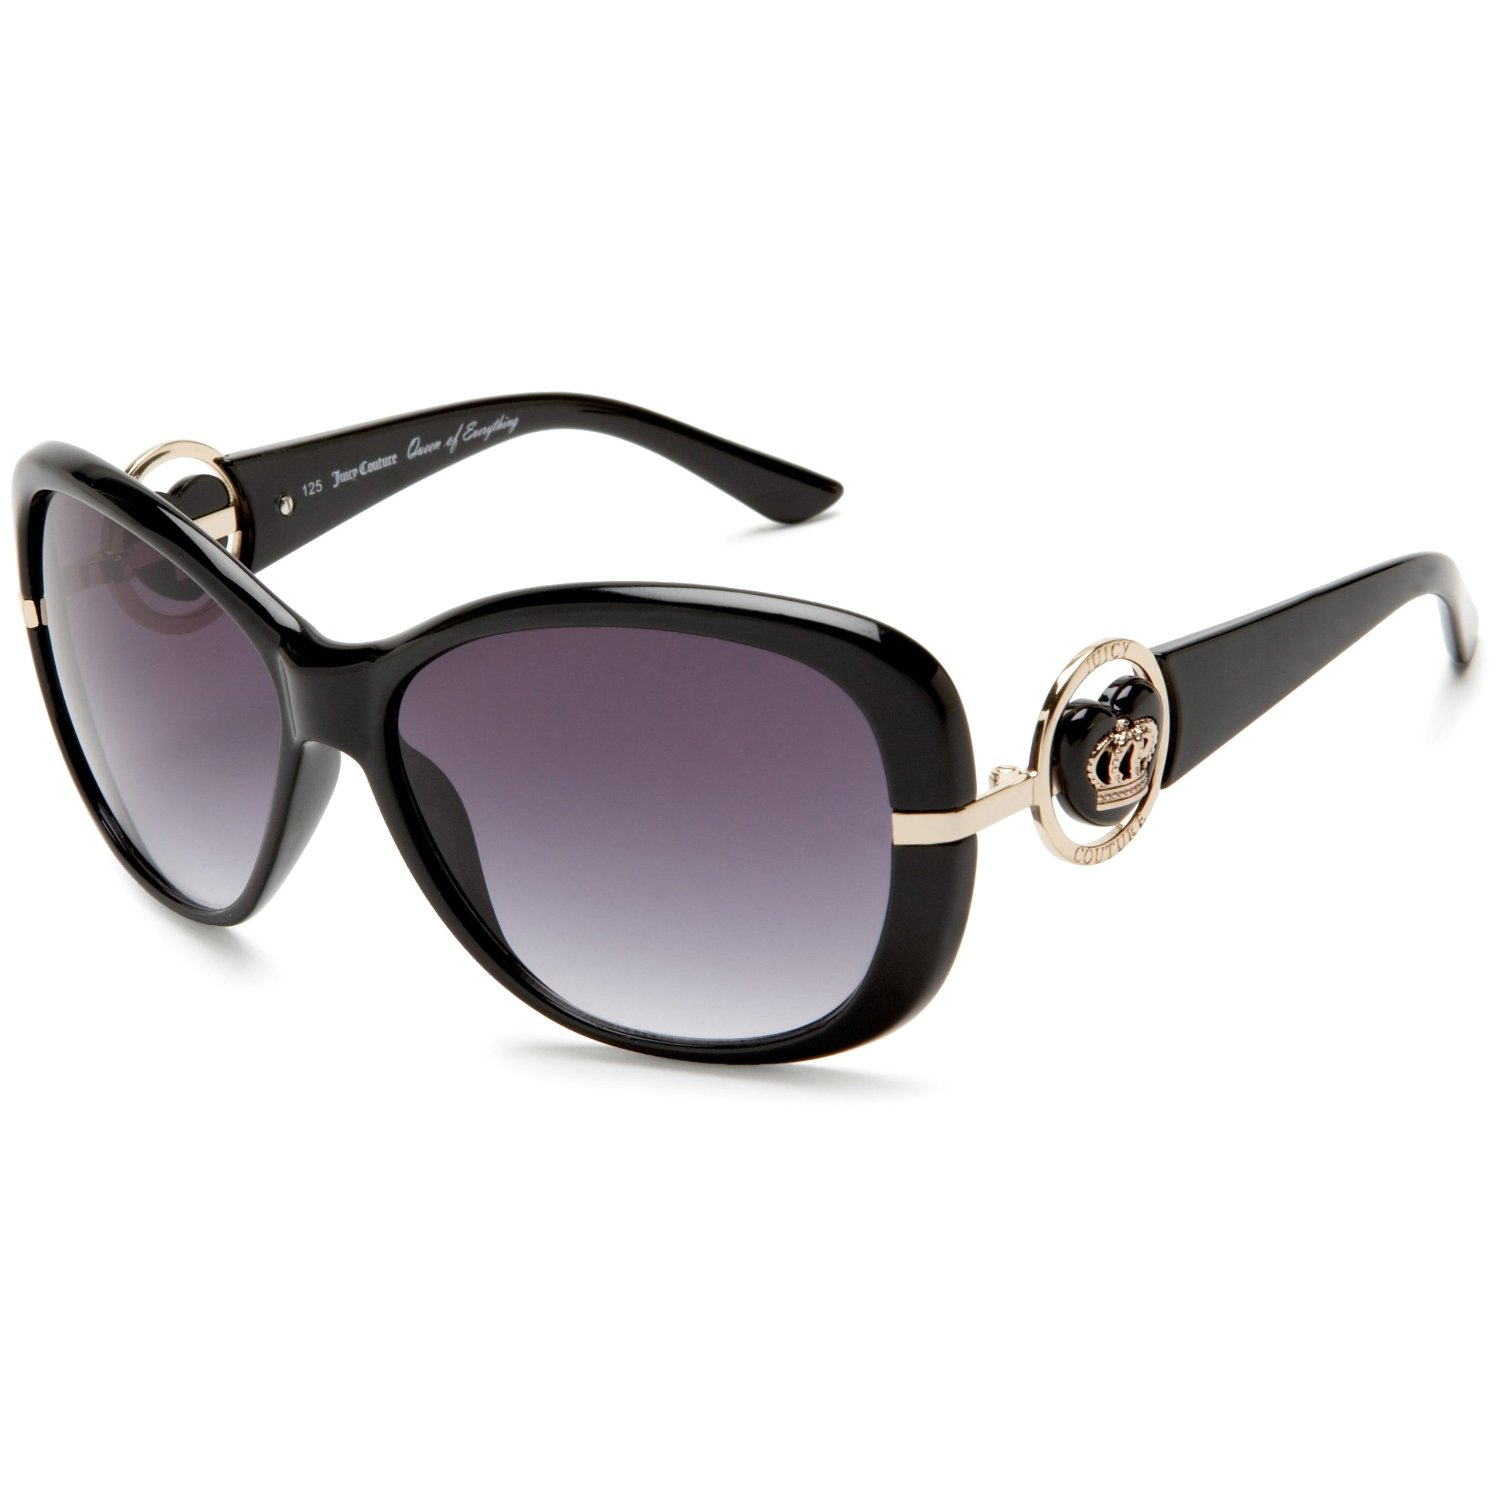 Juicy Couture Scarlet Resin Sunglasses In Black Black Framegray 